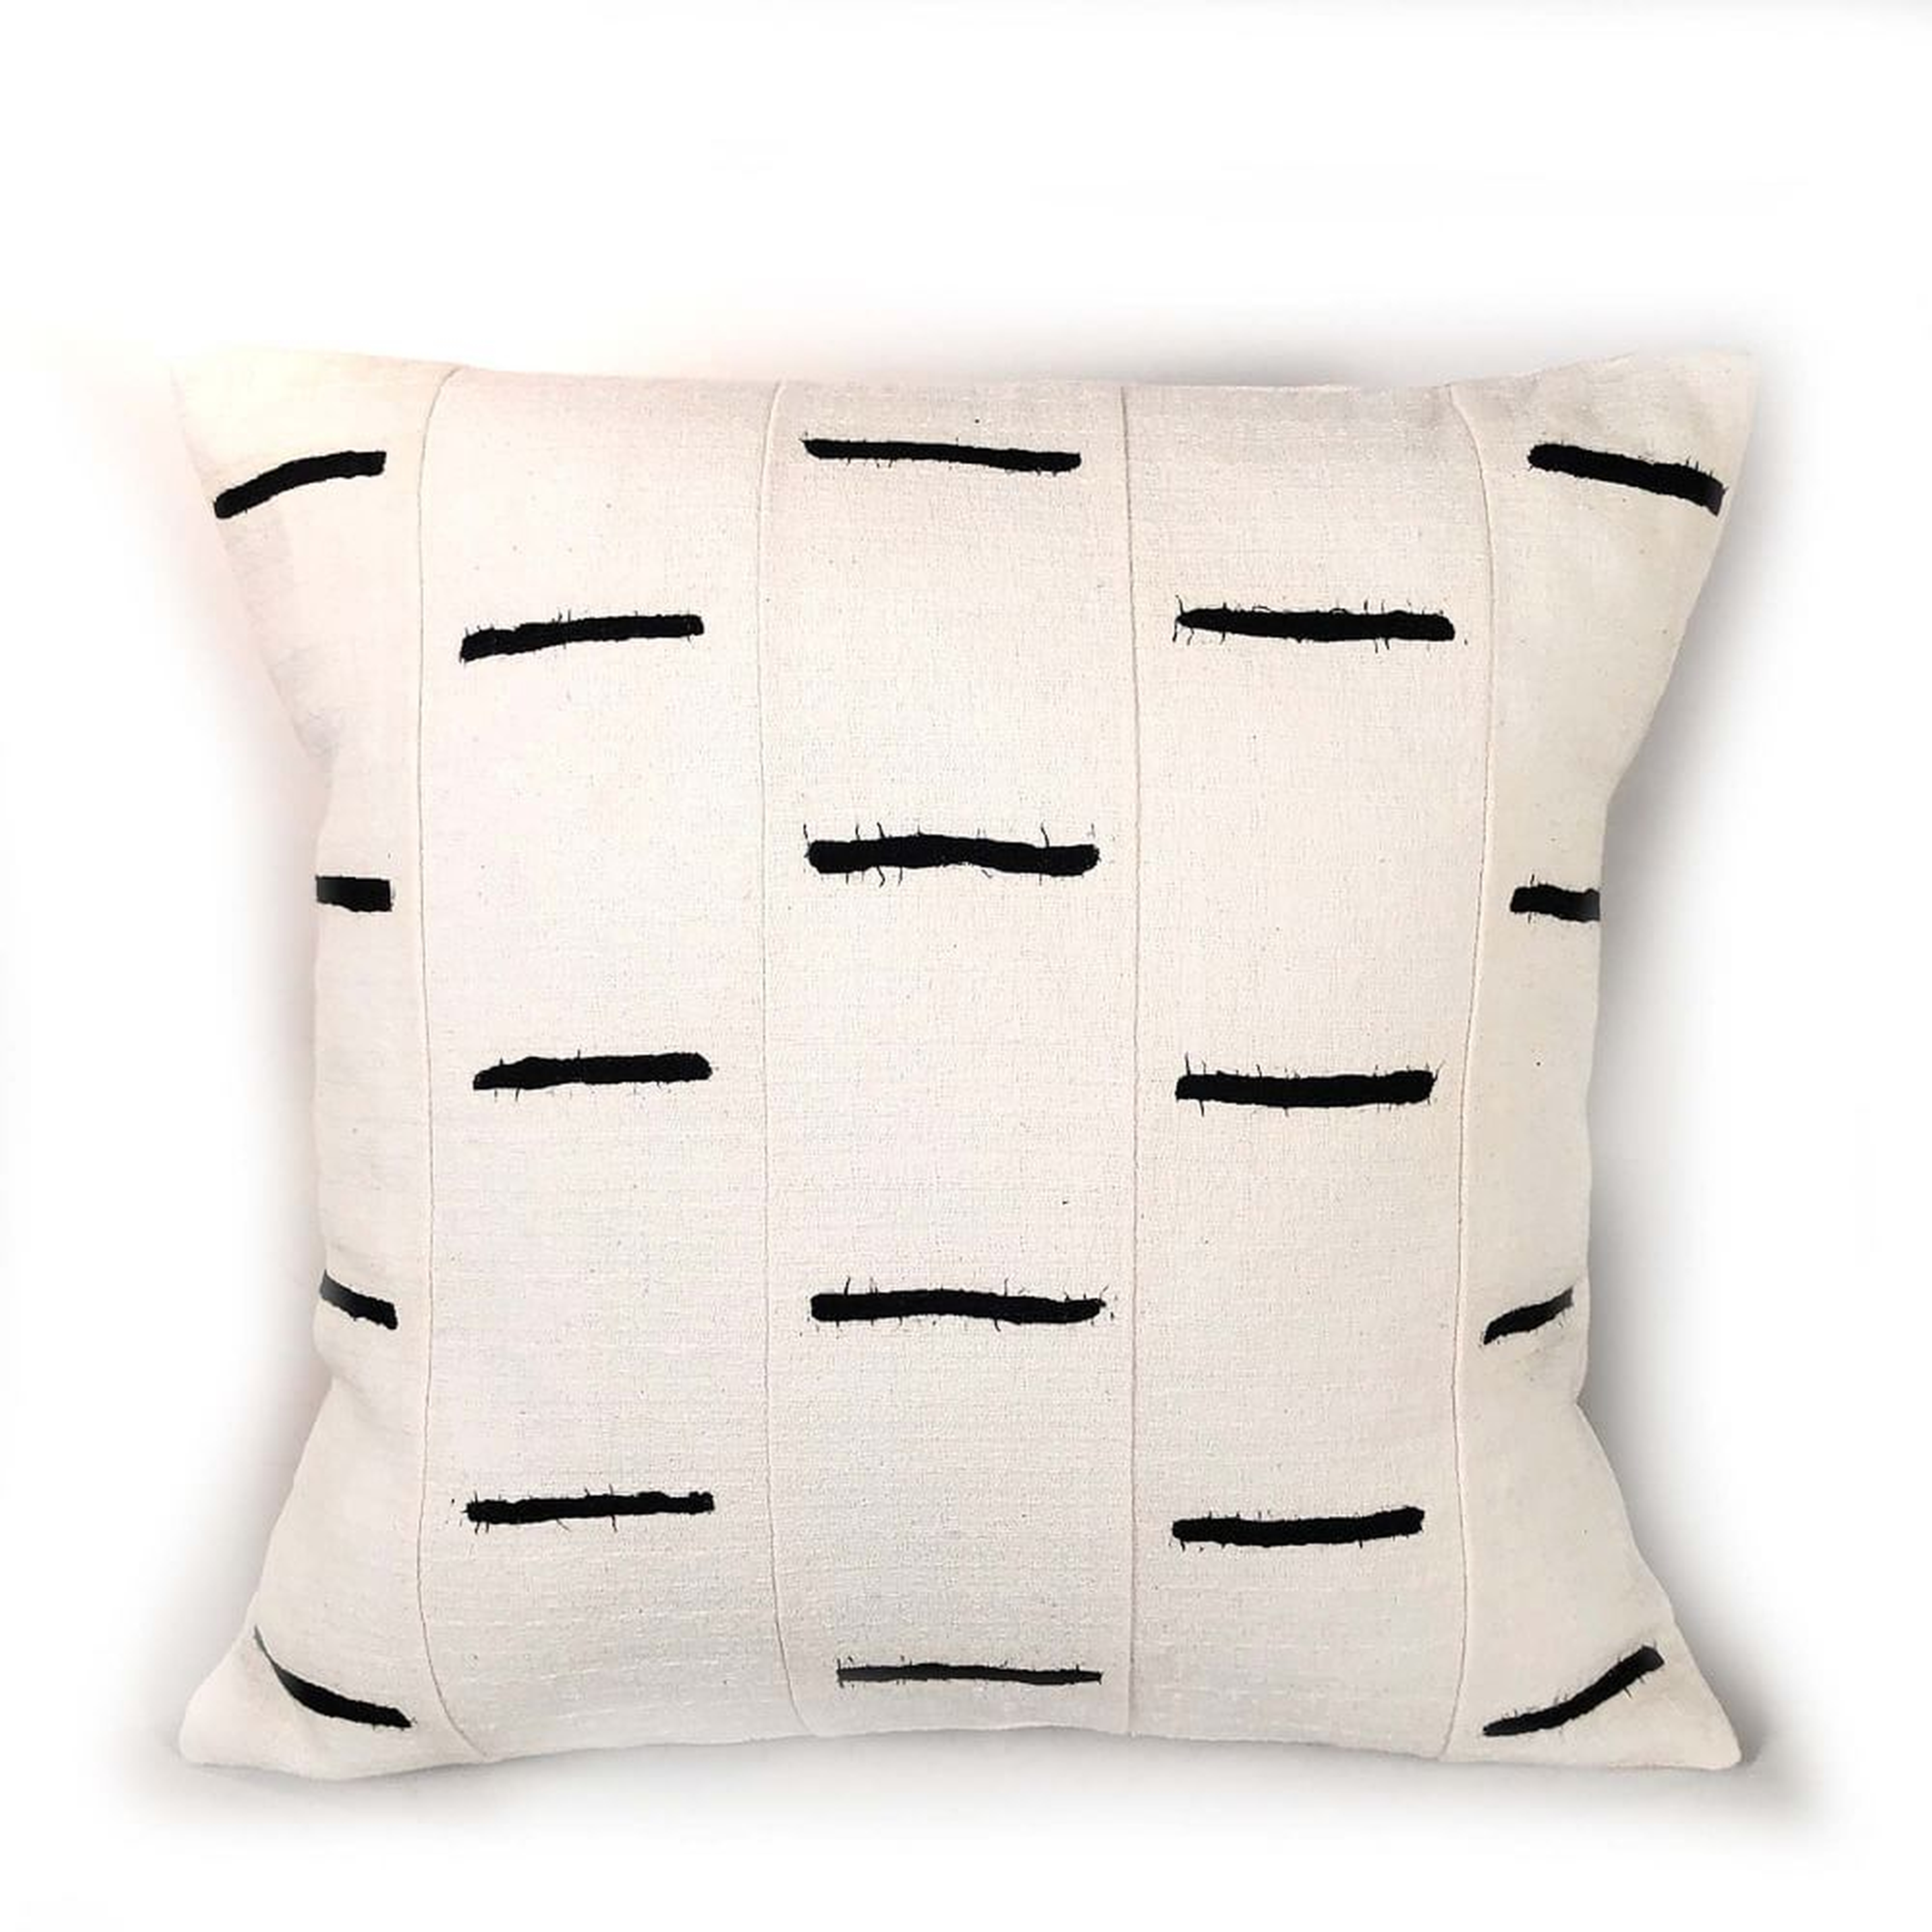 Tonga Pillow Cover, Black Dashes - West Elm